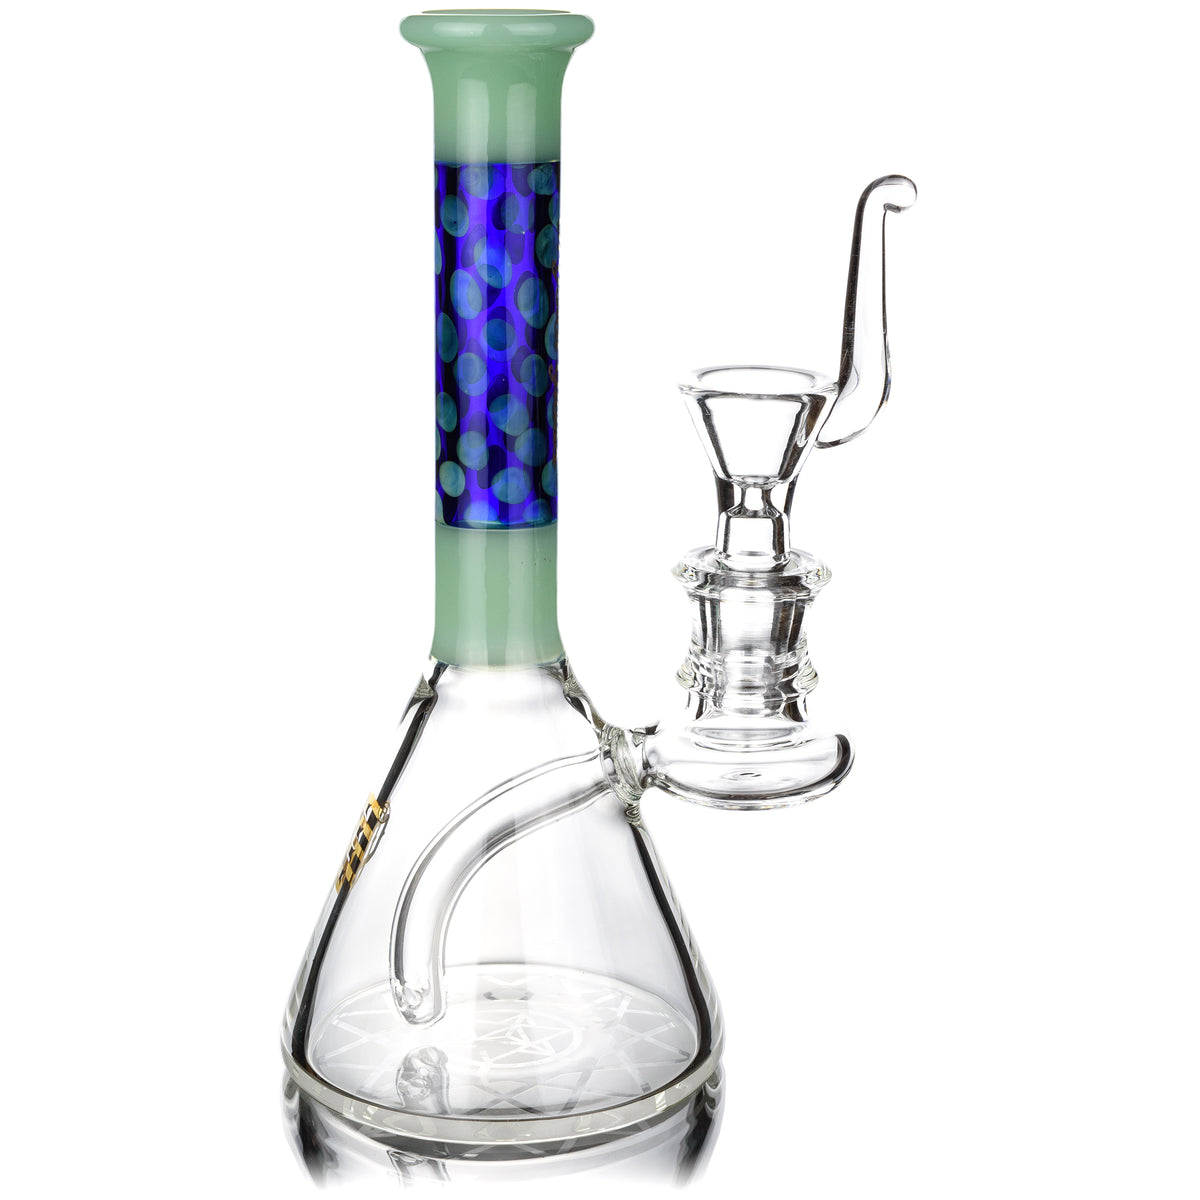 7" Beaker Bong w/ Patterned Color Glass Neck, by Crystal Glass (free banger included) - BKRY Inc.